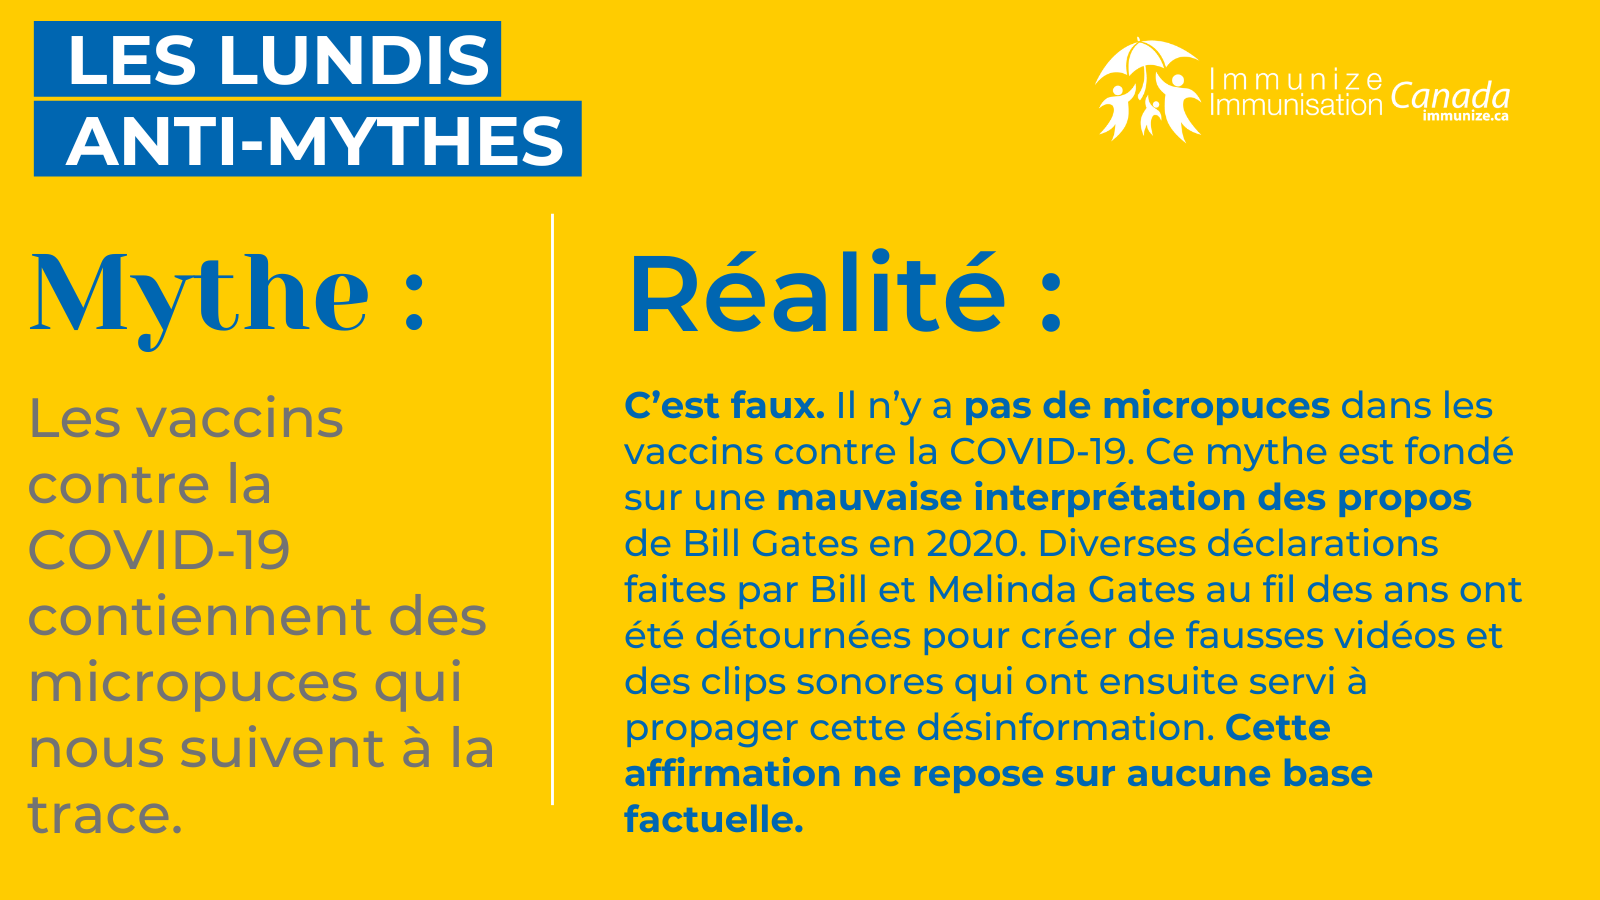 Les lundis anti-mythes - COVID-19 - image 9 pour Twitter/X